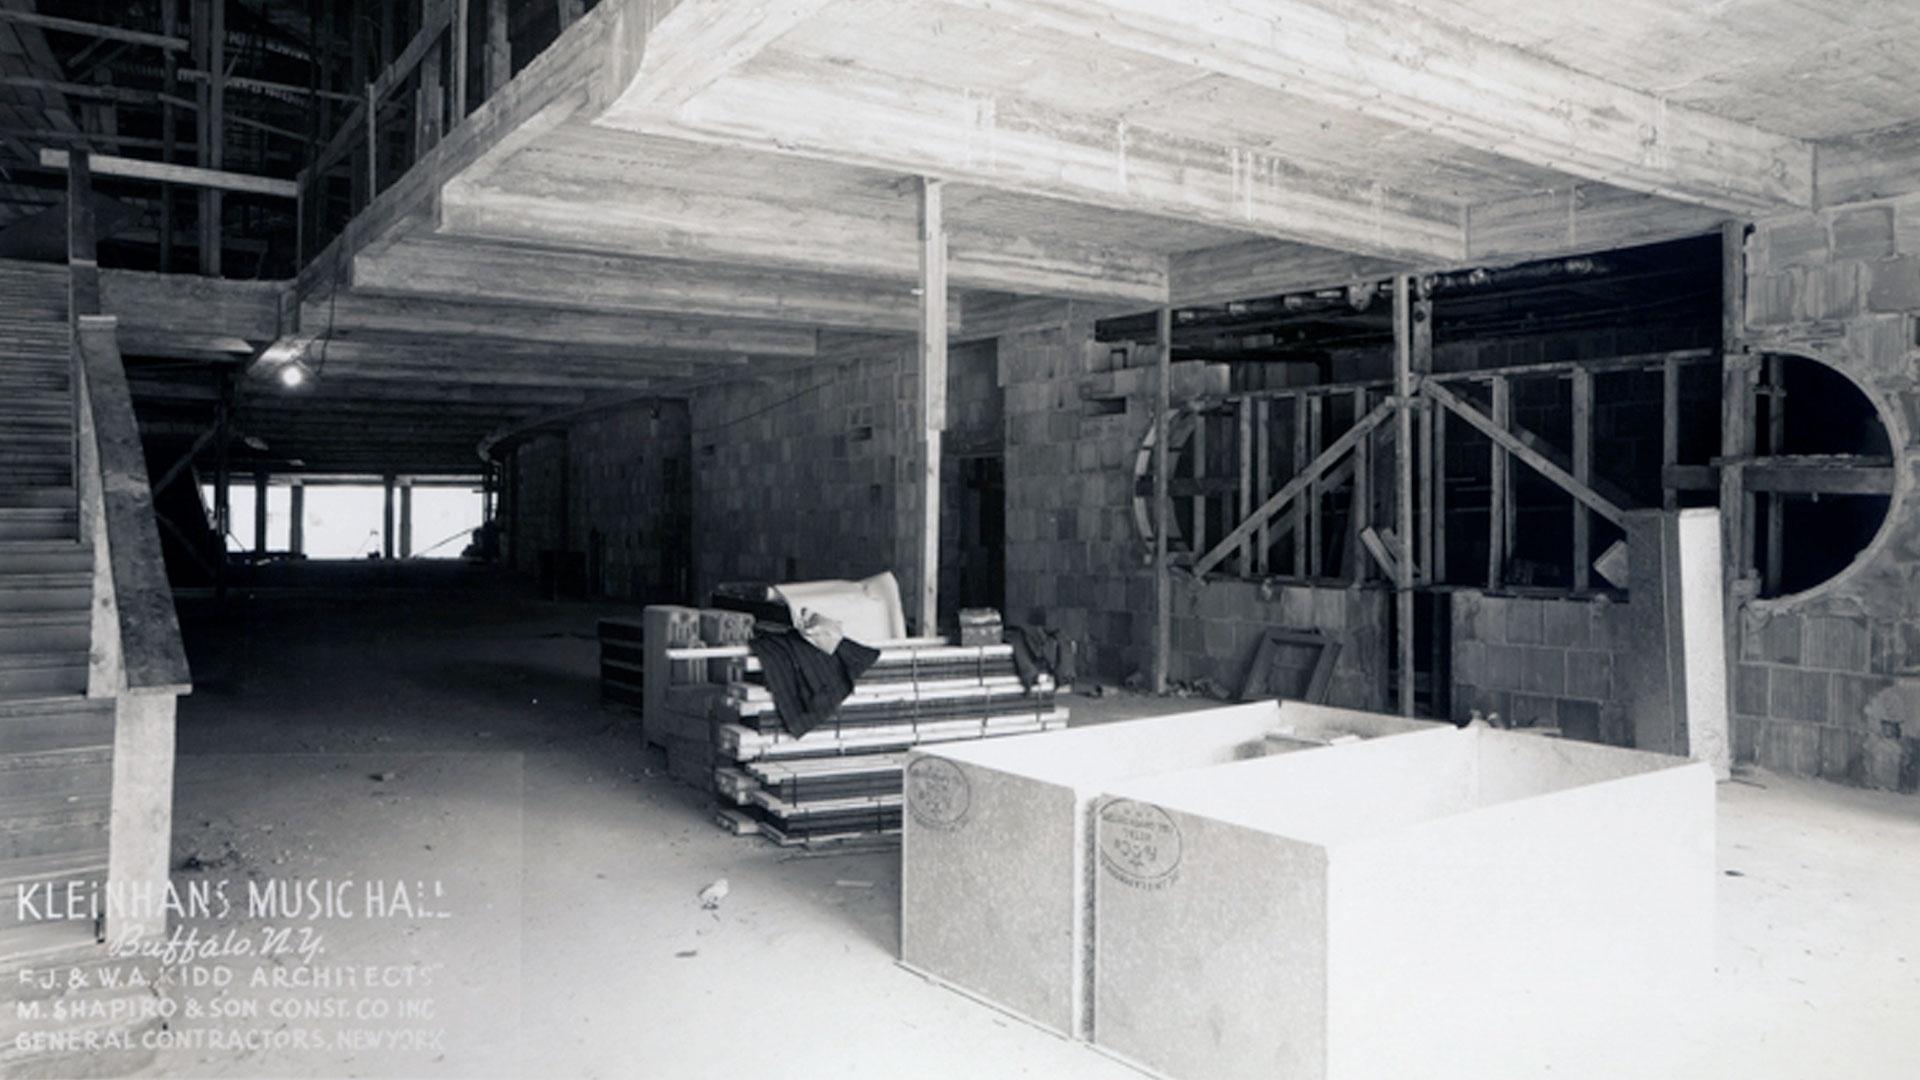 Construction on the lower level interior